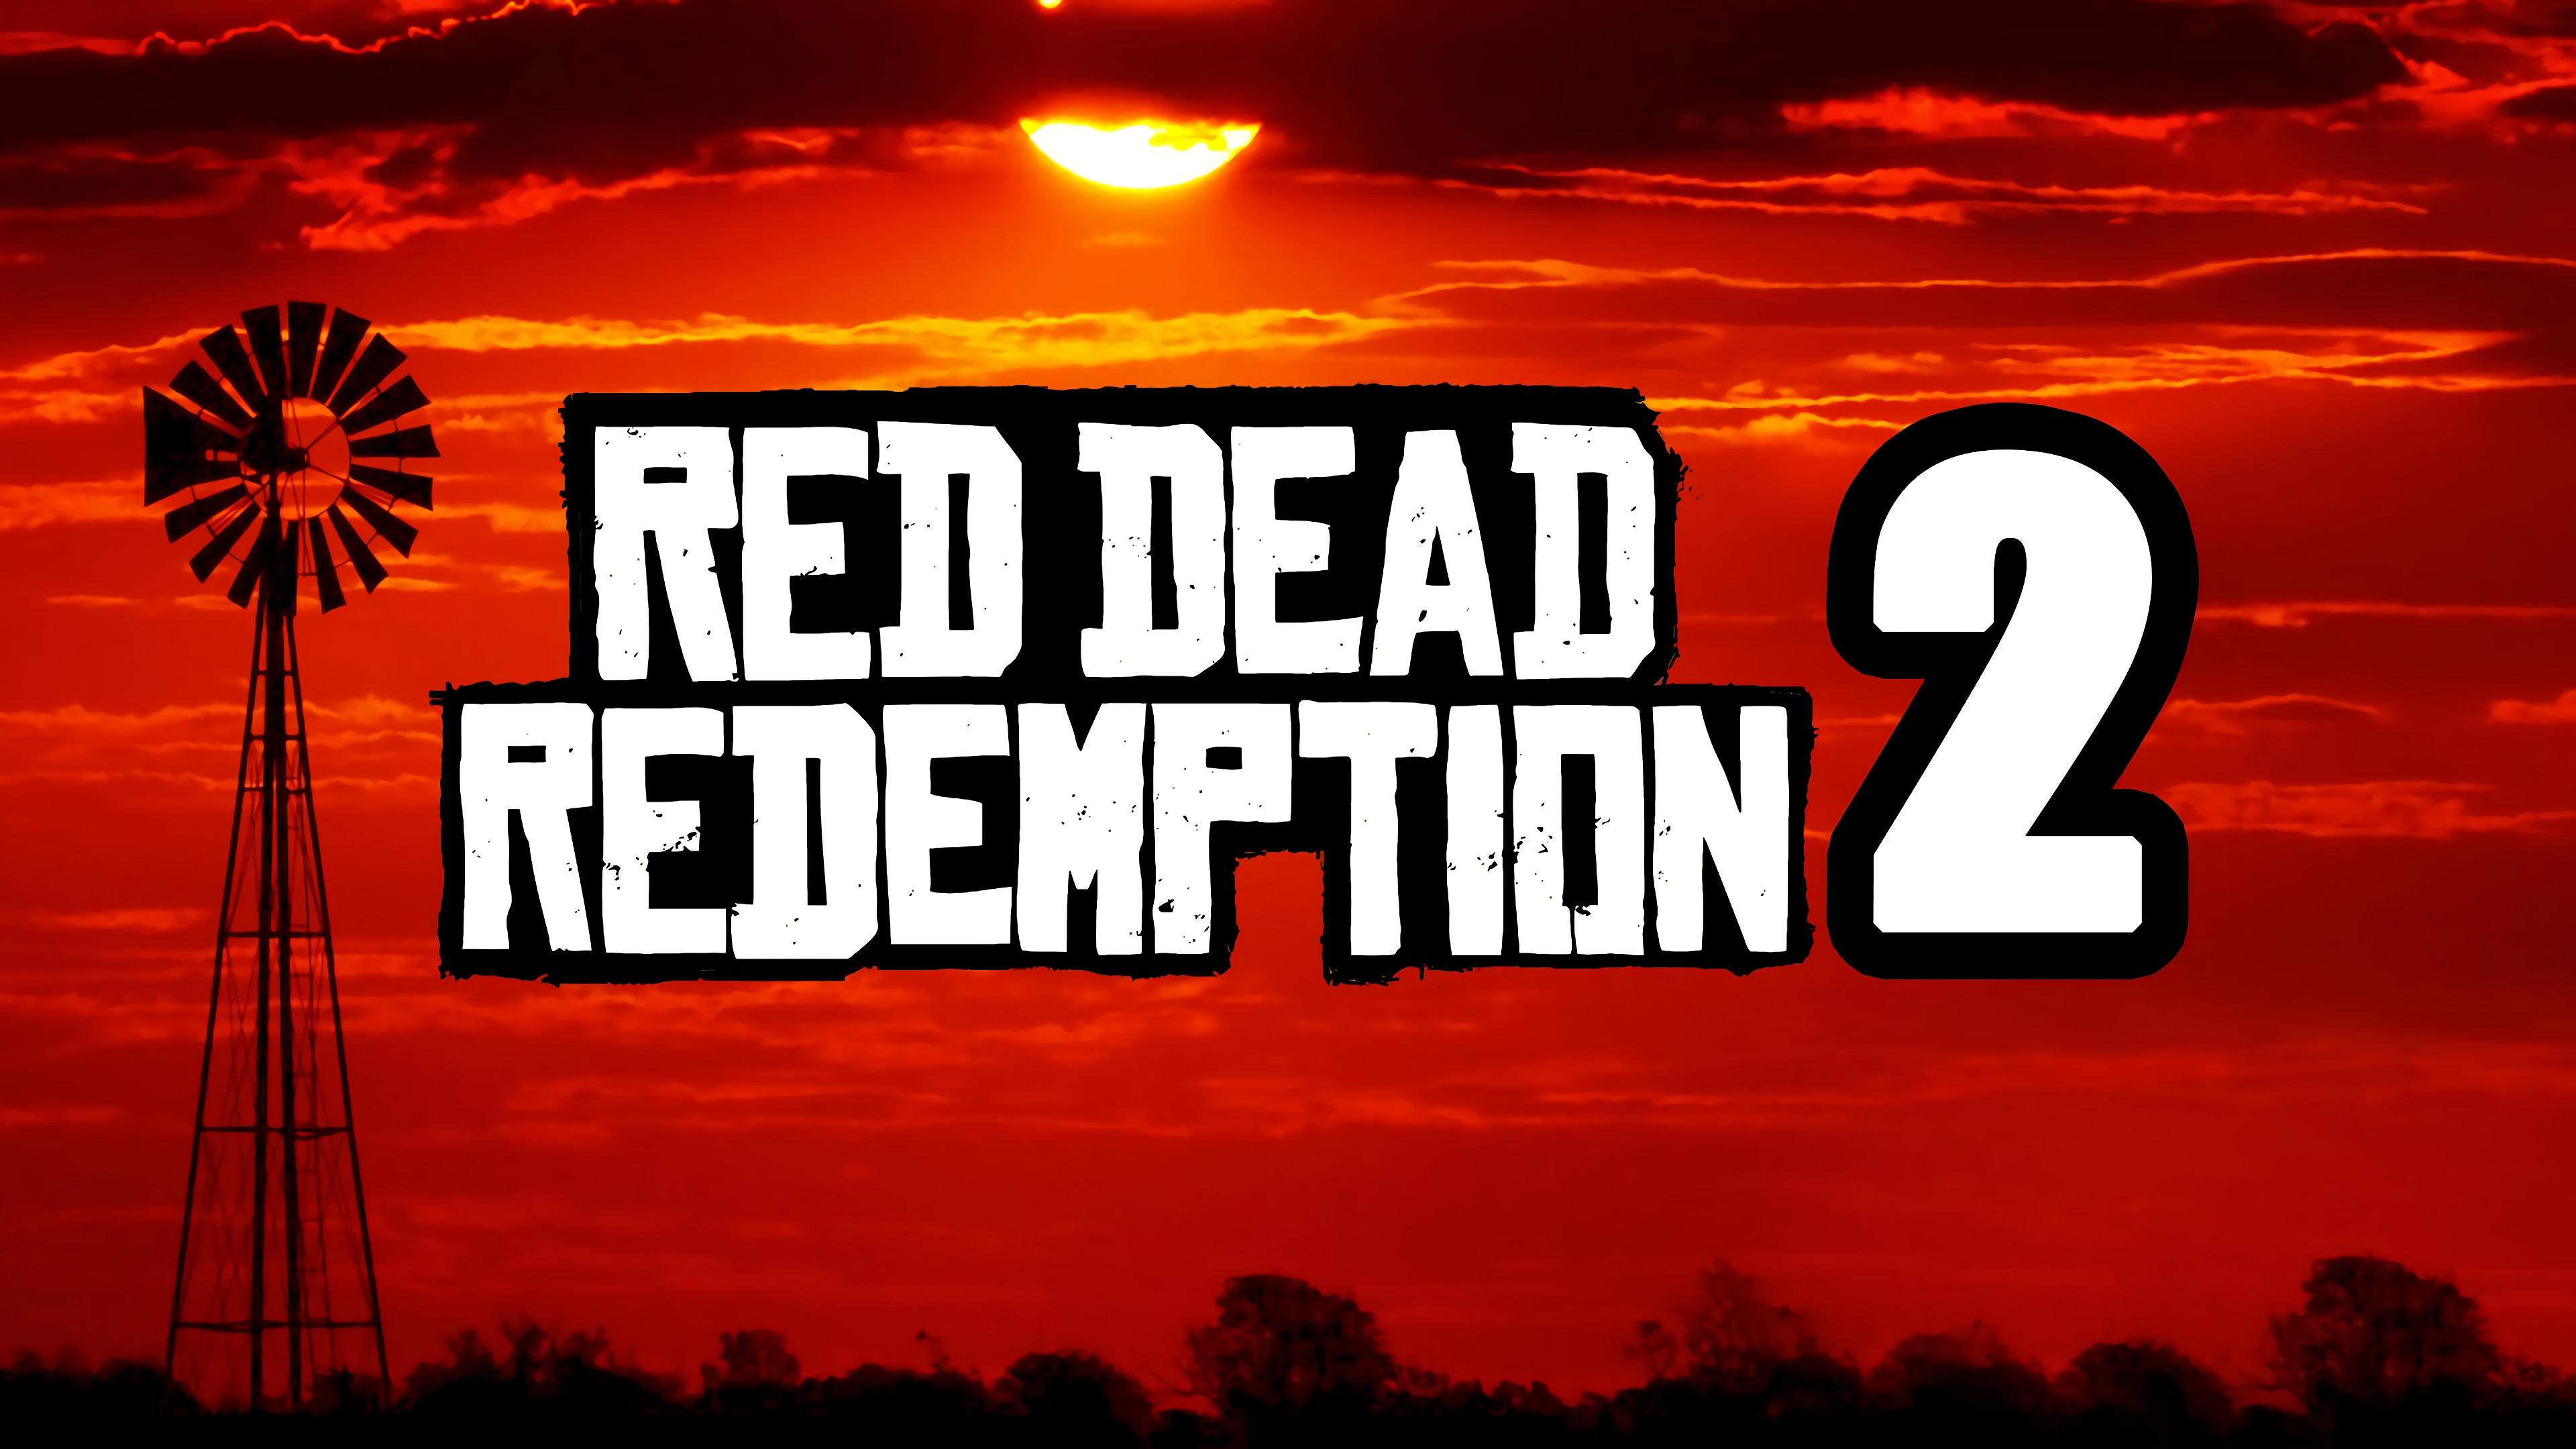 Red Dead Redemption 2 Video Game 4K UHD Wallpapers